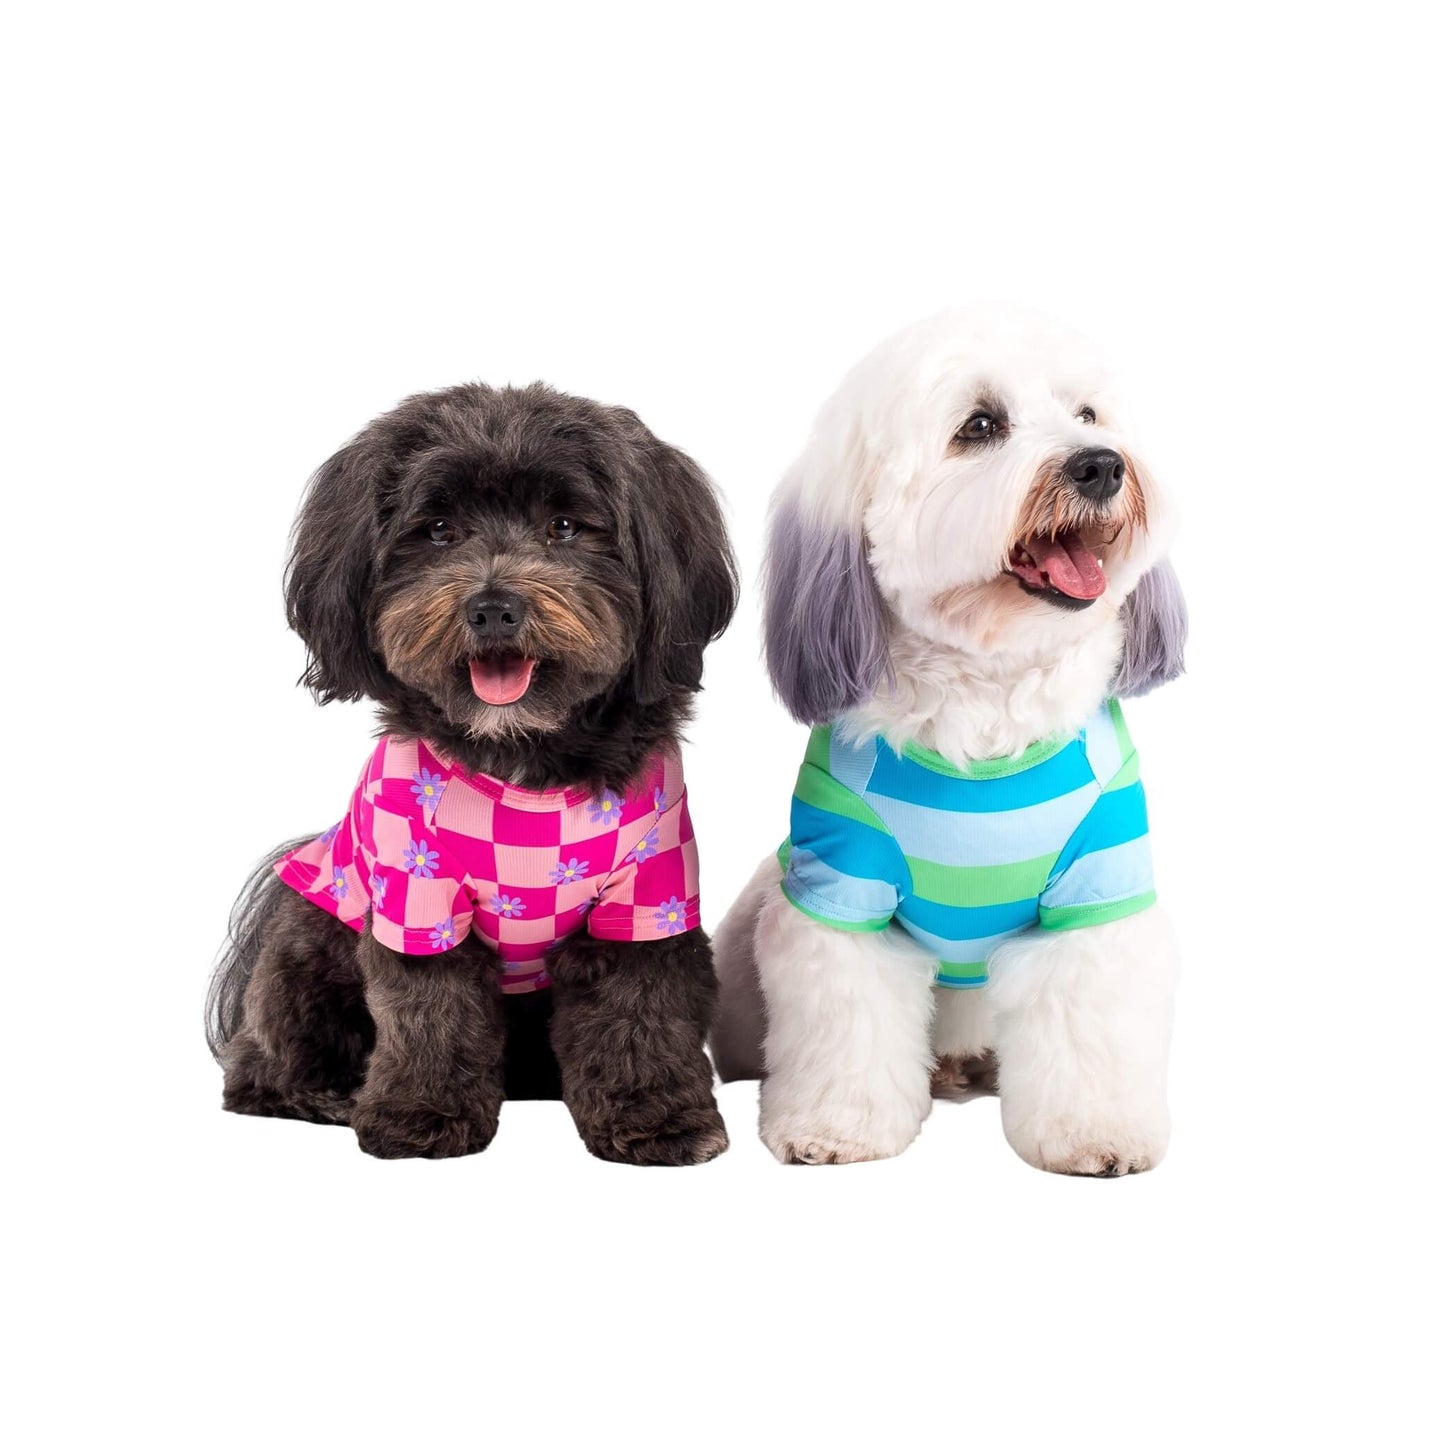 Two Havanese dogs wearing dog cooling shirts made by Vibrant Hound. The cooling shirts are blue and green stripes and the other is pink chequers with daisys on them.